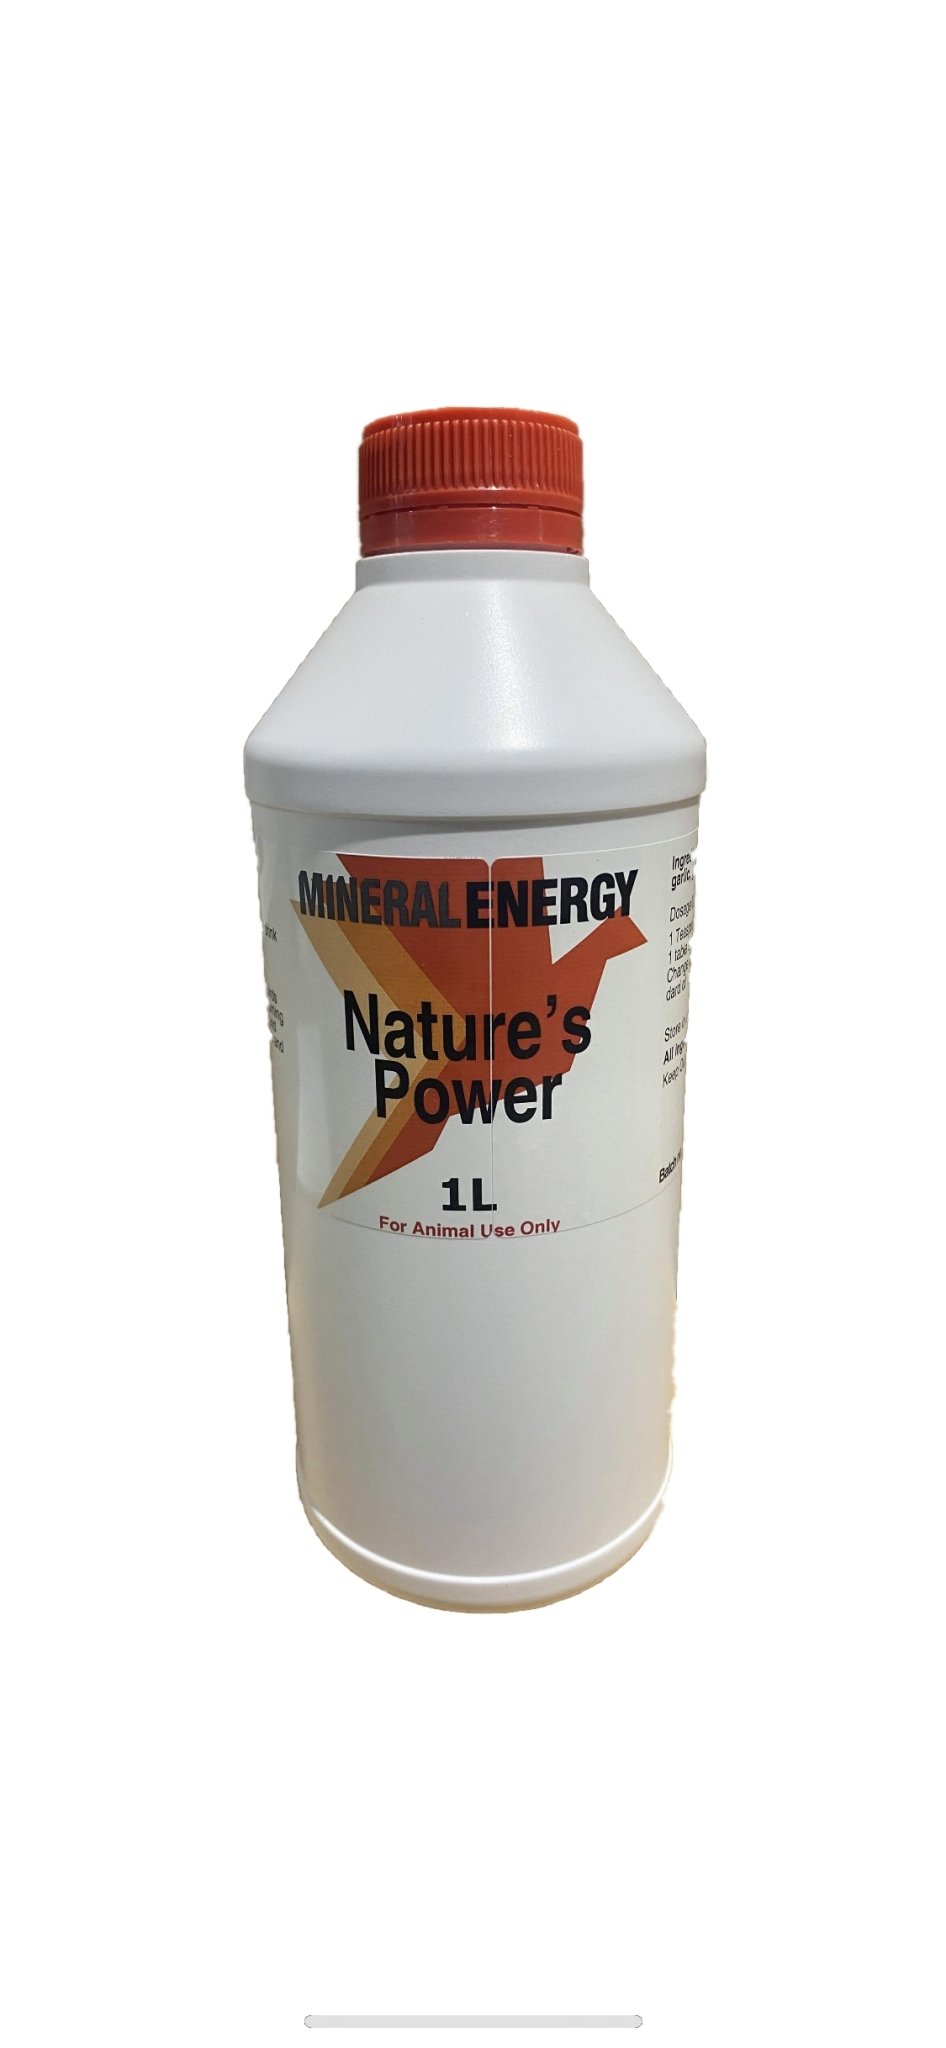 Mineral Energy Natures Power 1L - Woonona Petfood & Produce